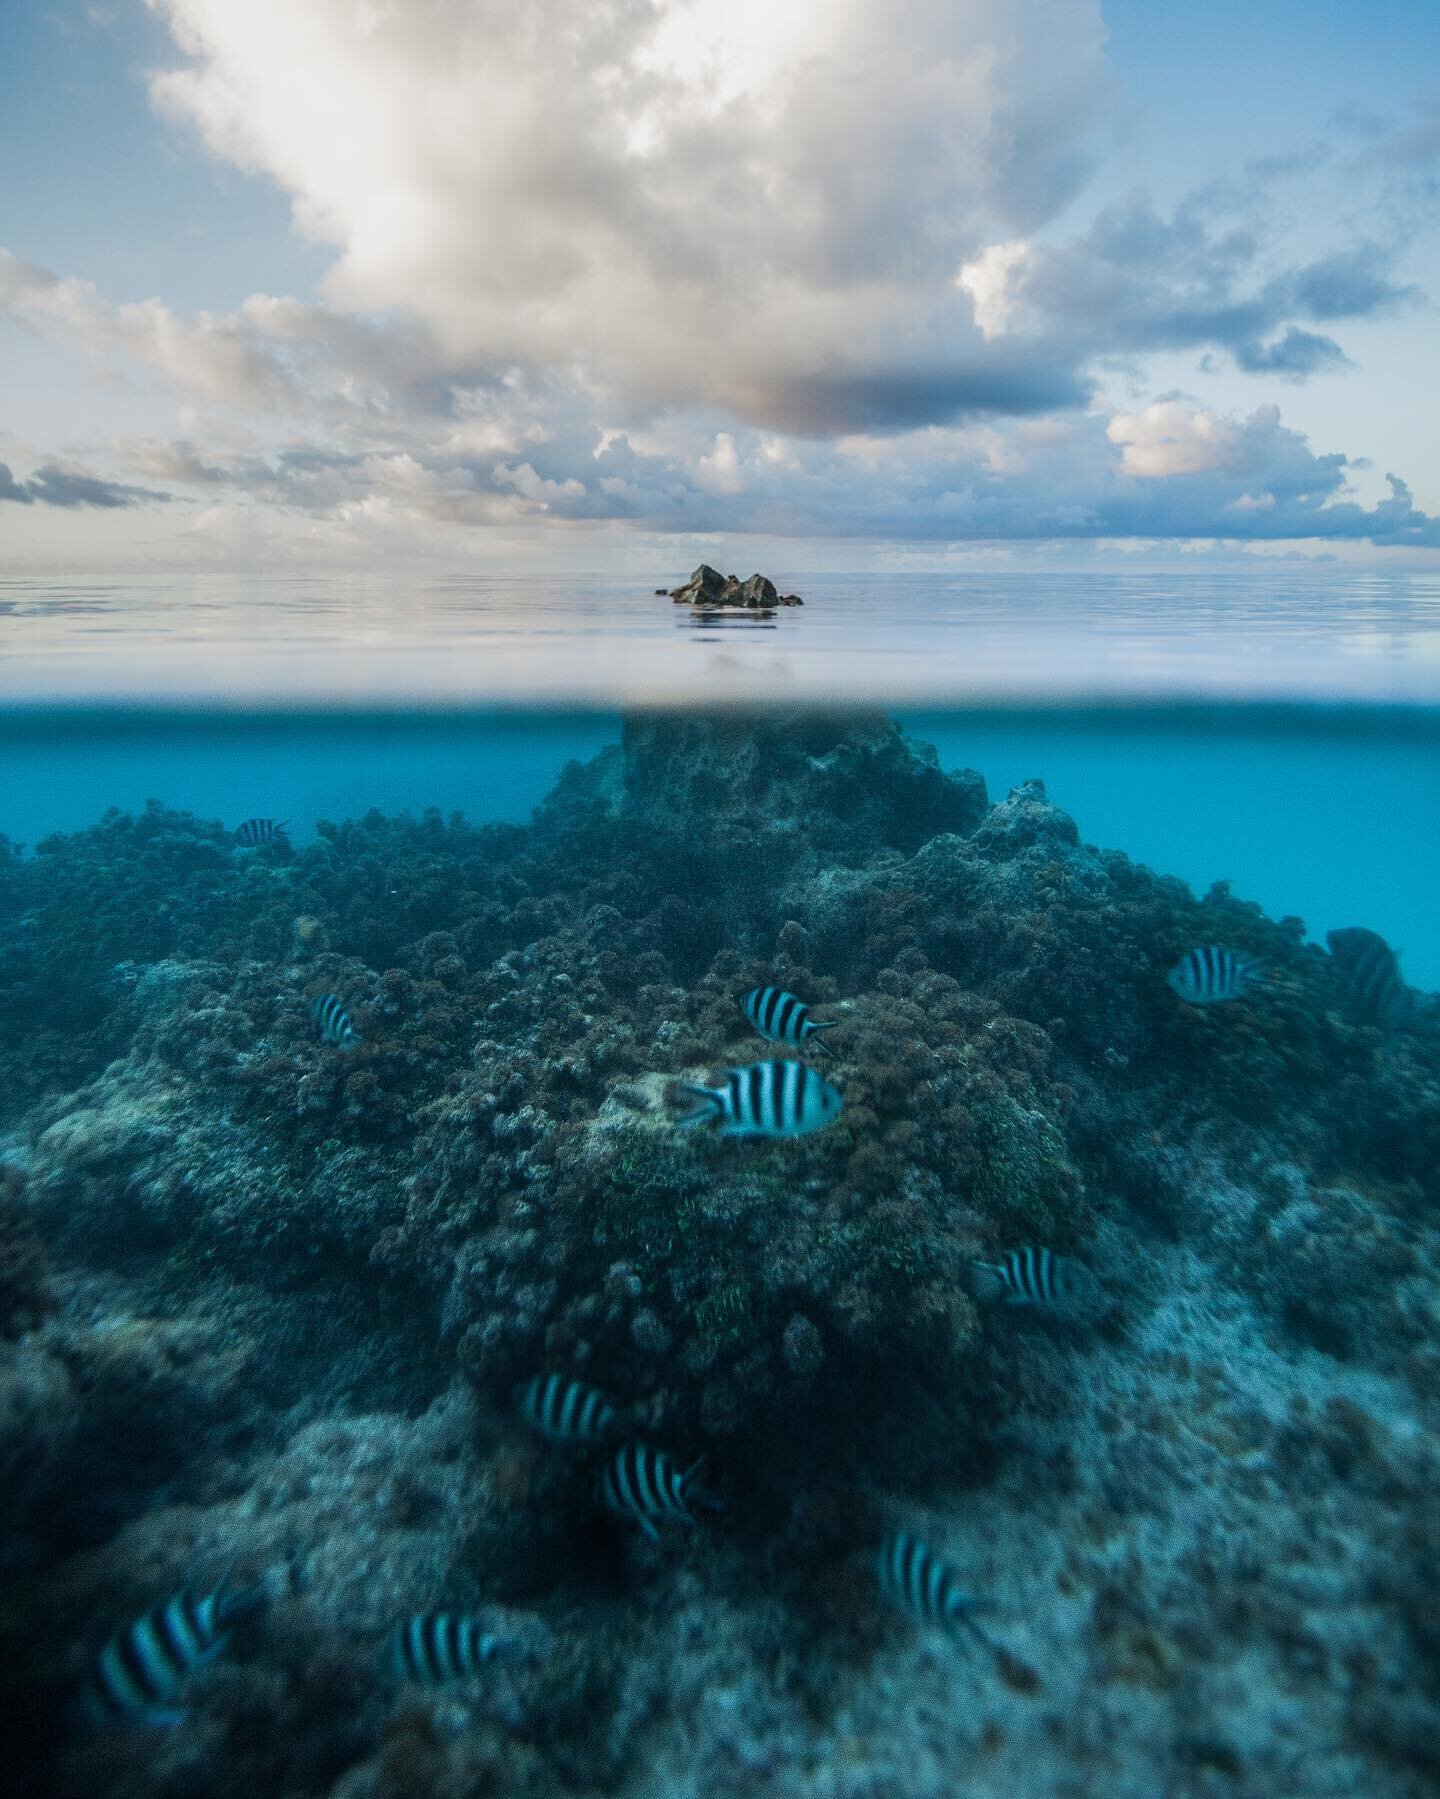 Happy World Reef Day!

Sharing a collection of images from reefs around the world including Belize, French Polynesia, and Hawaii. These delicate ecosystems are teeming with life and I hope we keep them that way for generations to come.

Where is your